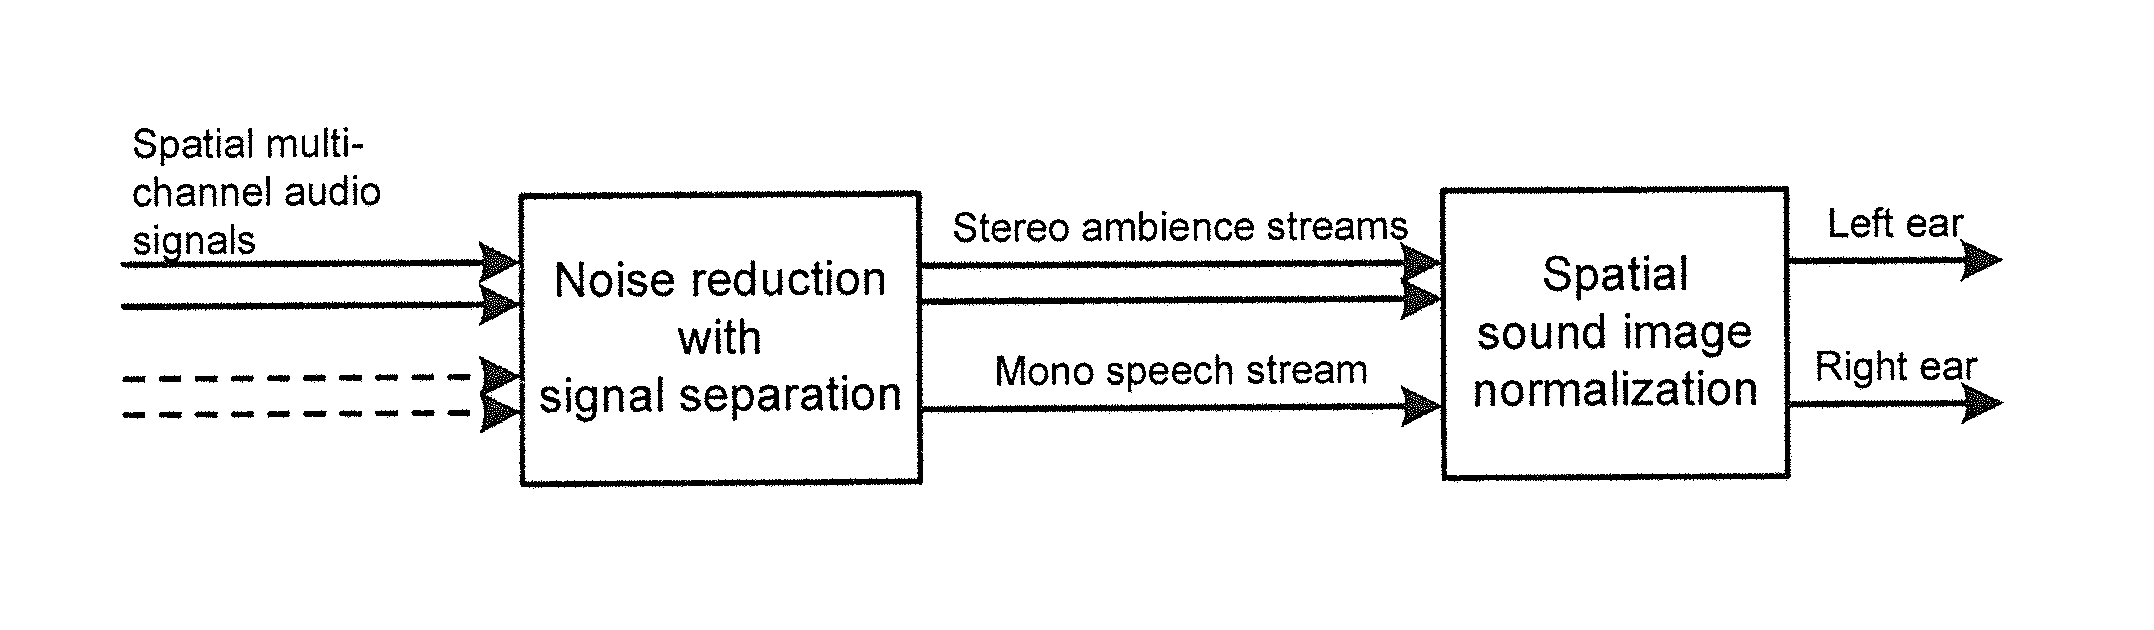 Method and apparatus for communicating with audio signals having corresponding spatial characteristics